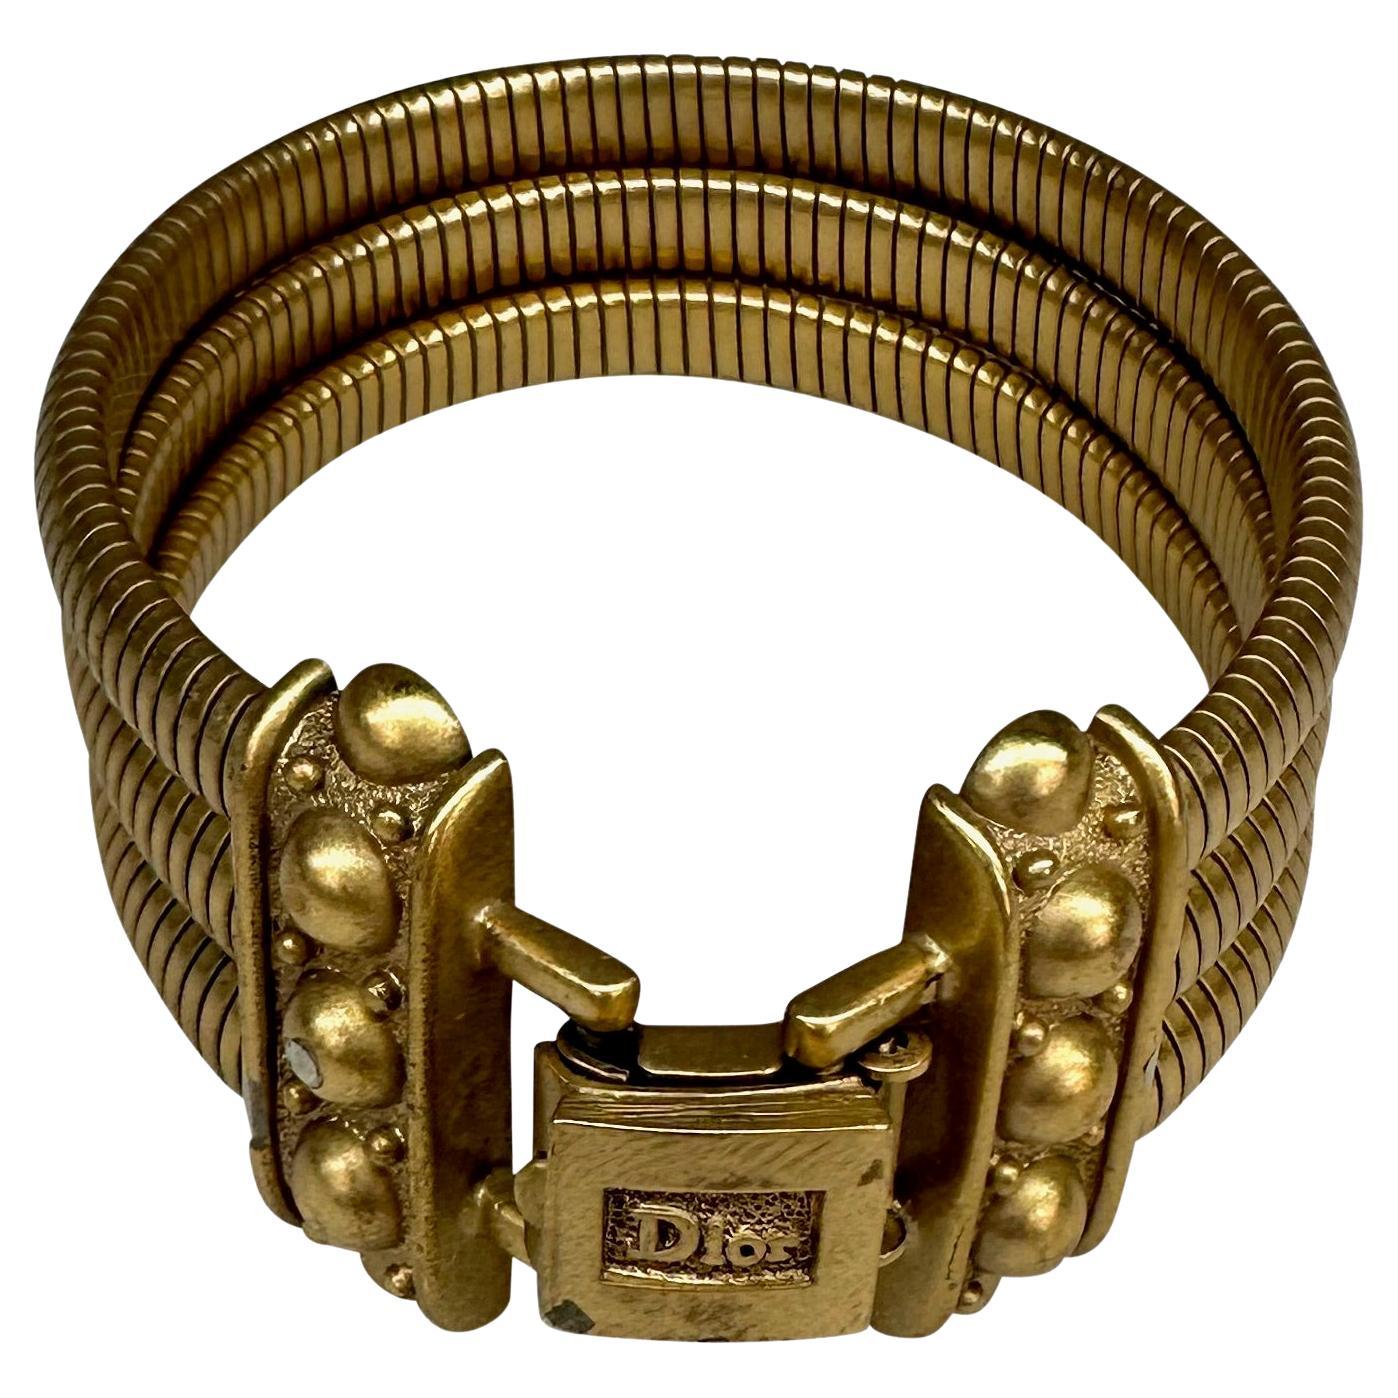 1997 Christian Dior by John Galliano Bronze Coil Bracelet For Sale